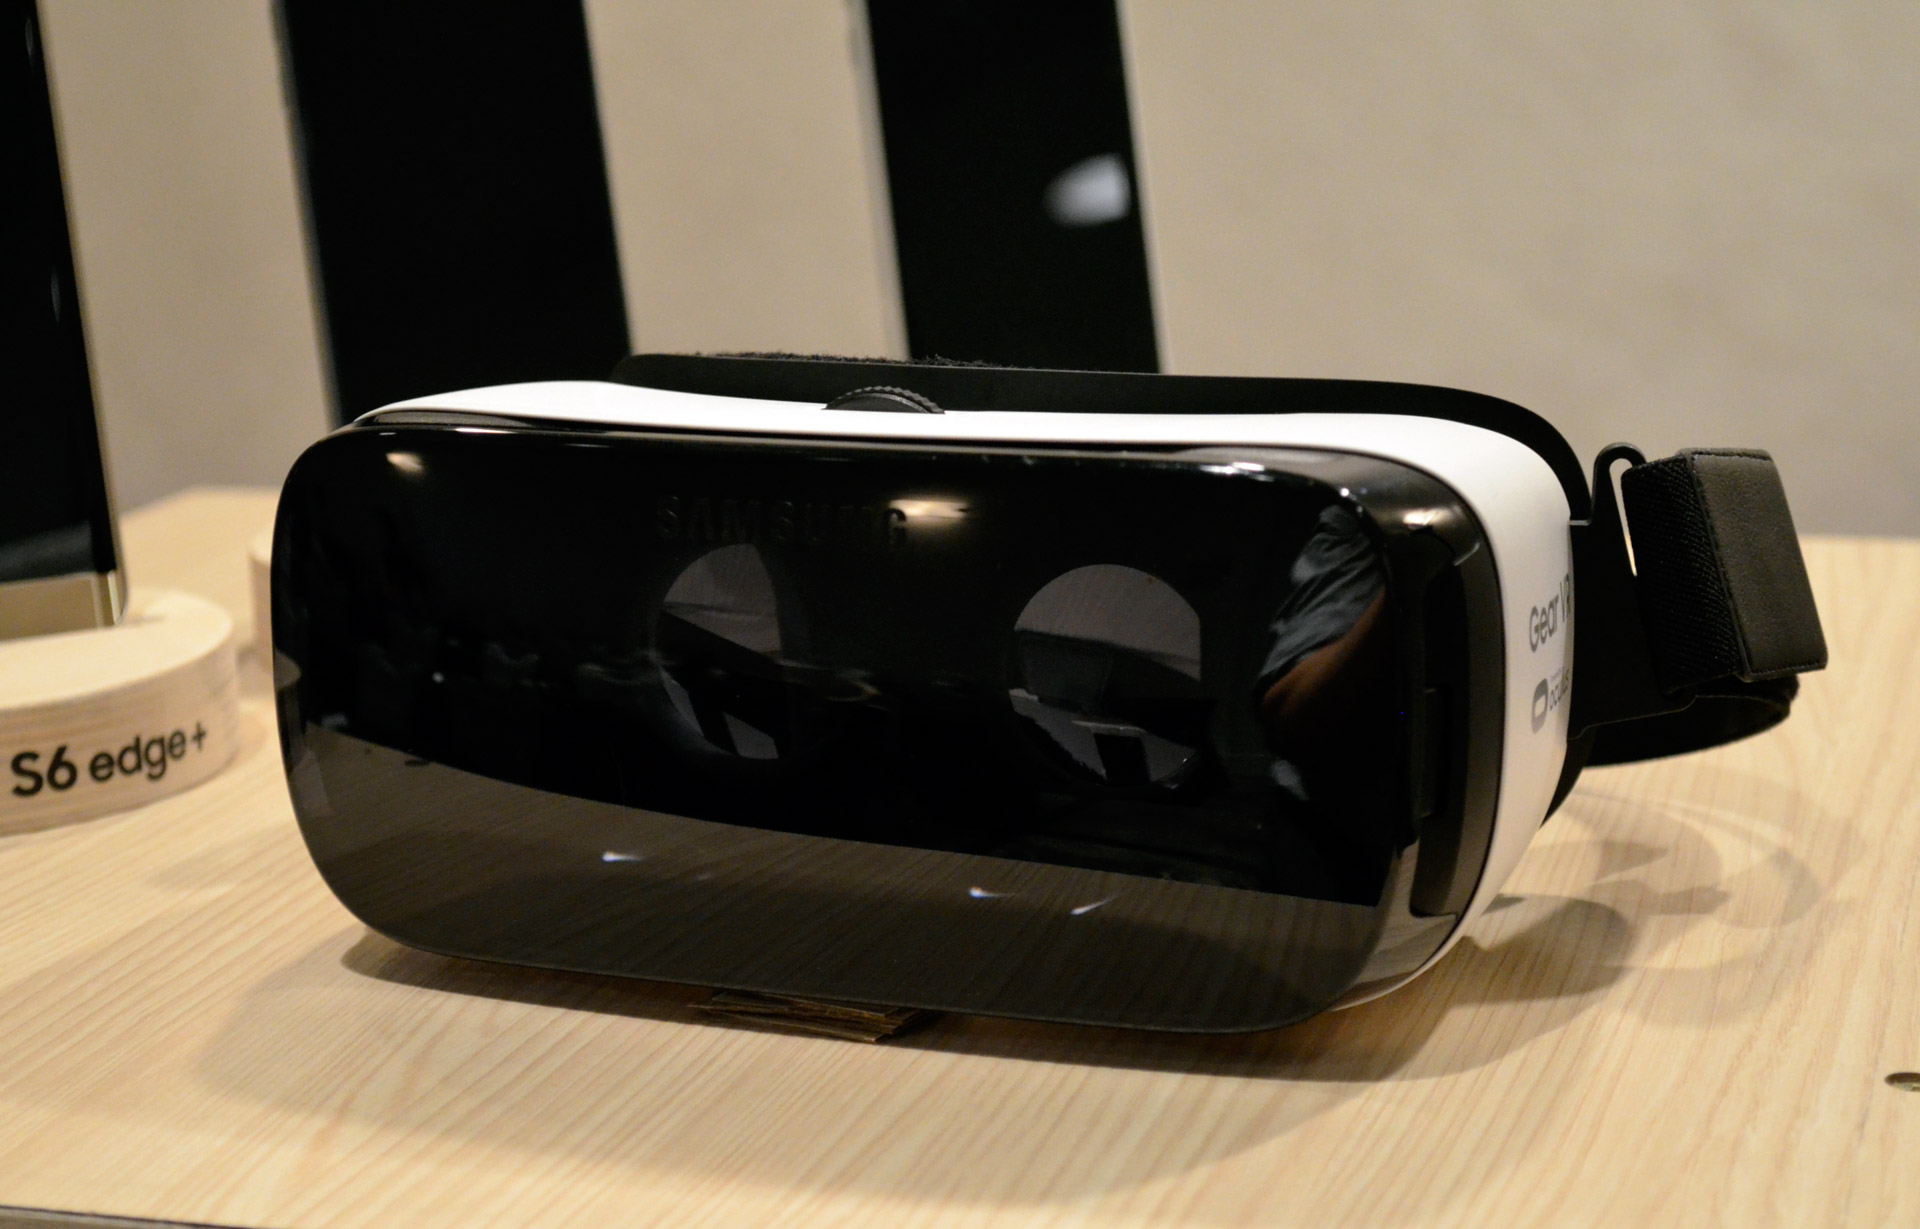 gear-vr-consumer-edition-features-price-specs-buy